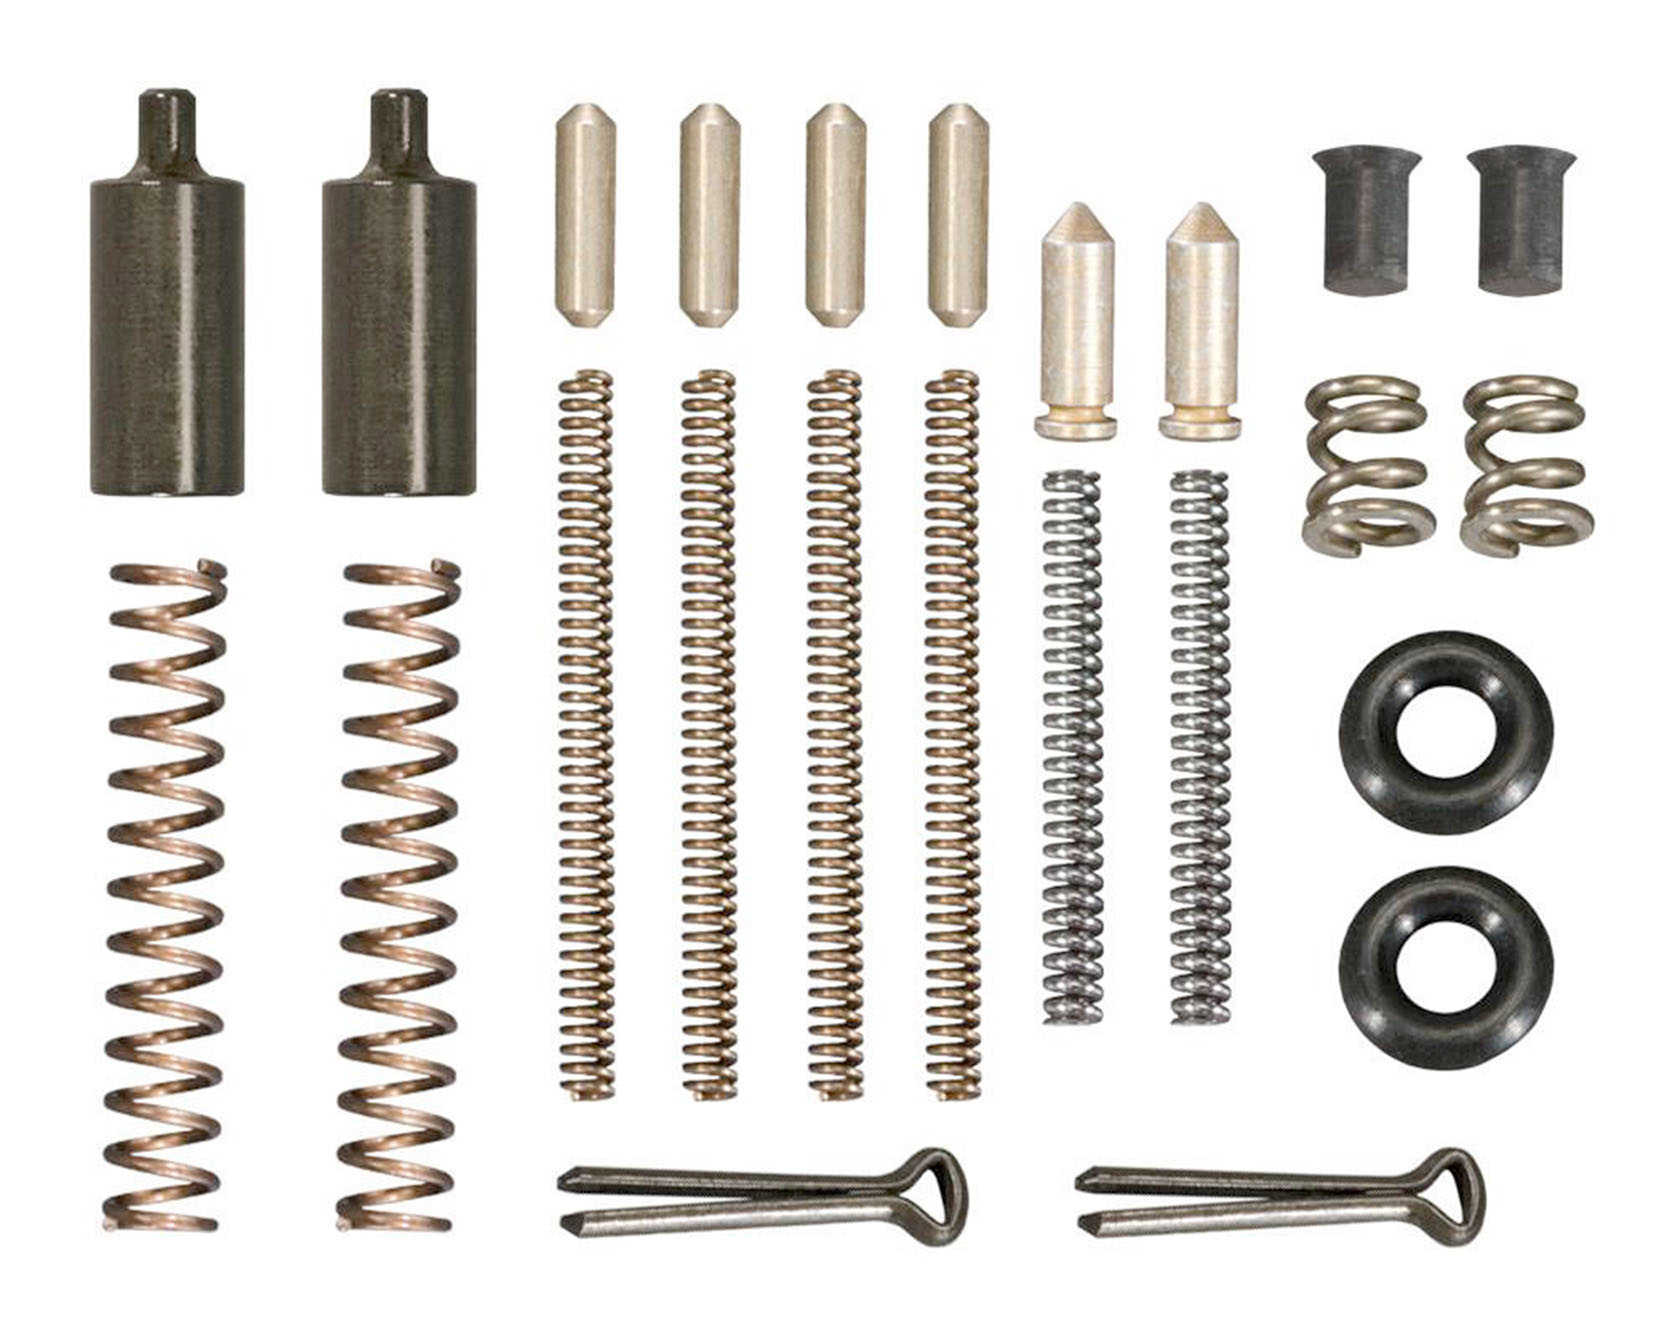 Windham Weaponry PKMWK Most Wanted Parts Kit Clam